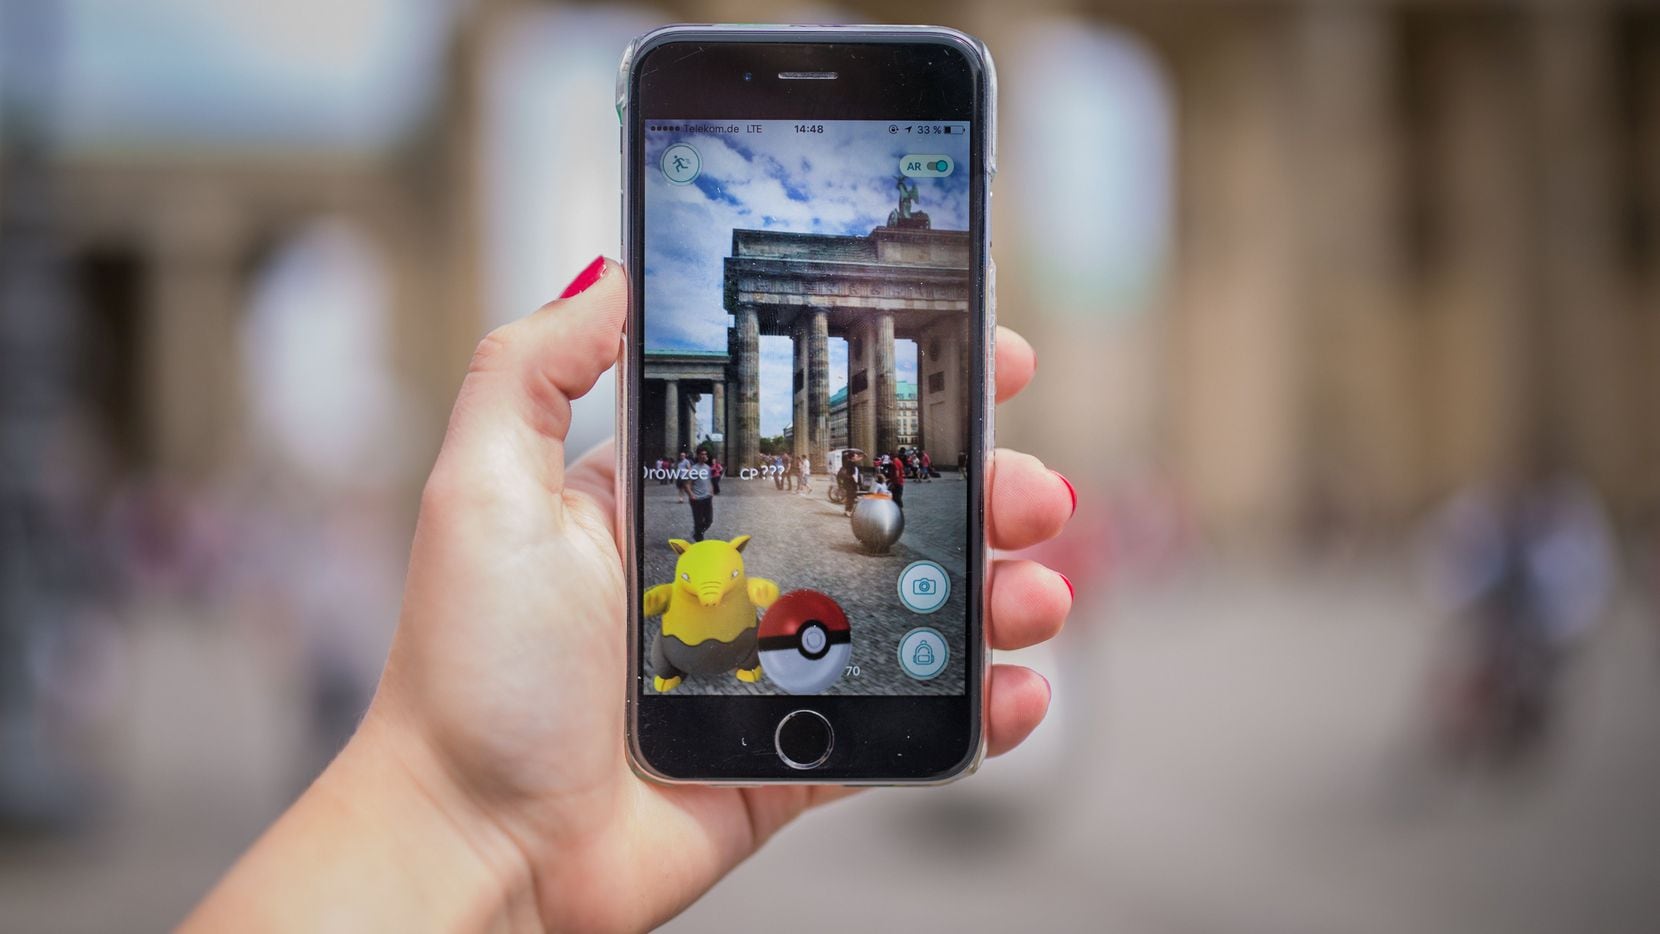 Pokemon Go has gotten Texans trying to catch 'em all into restaurants and stores across...